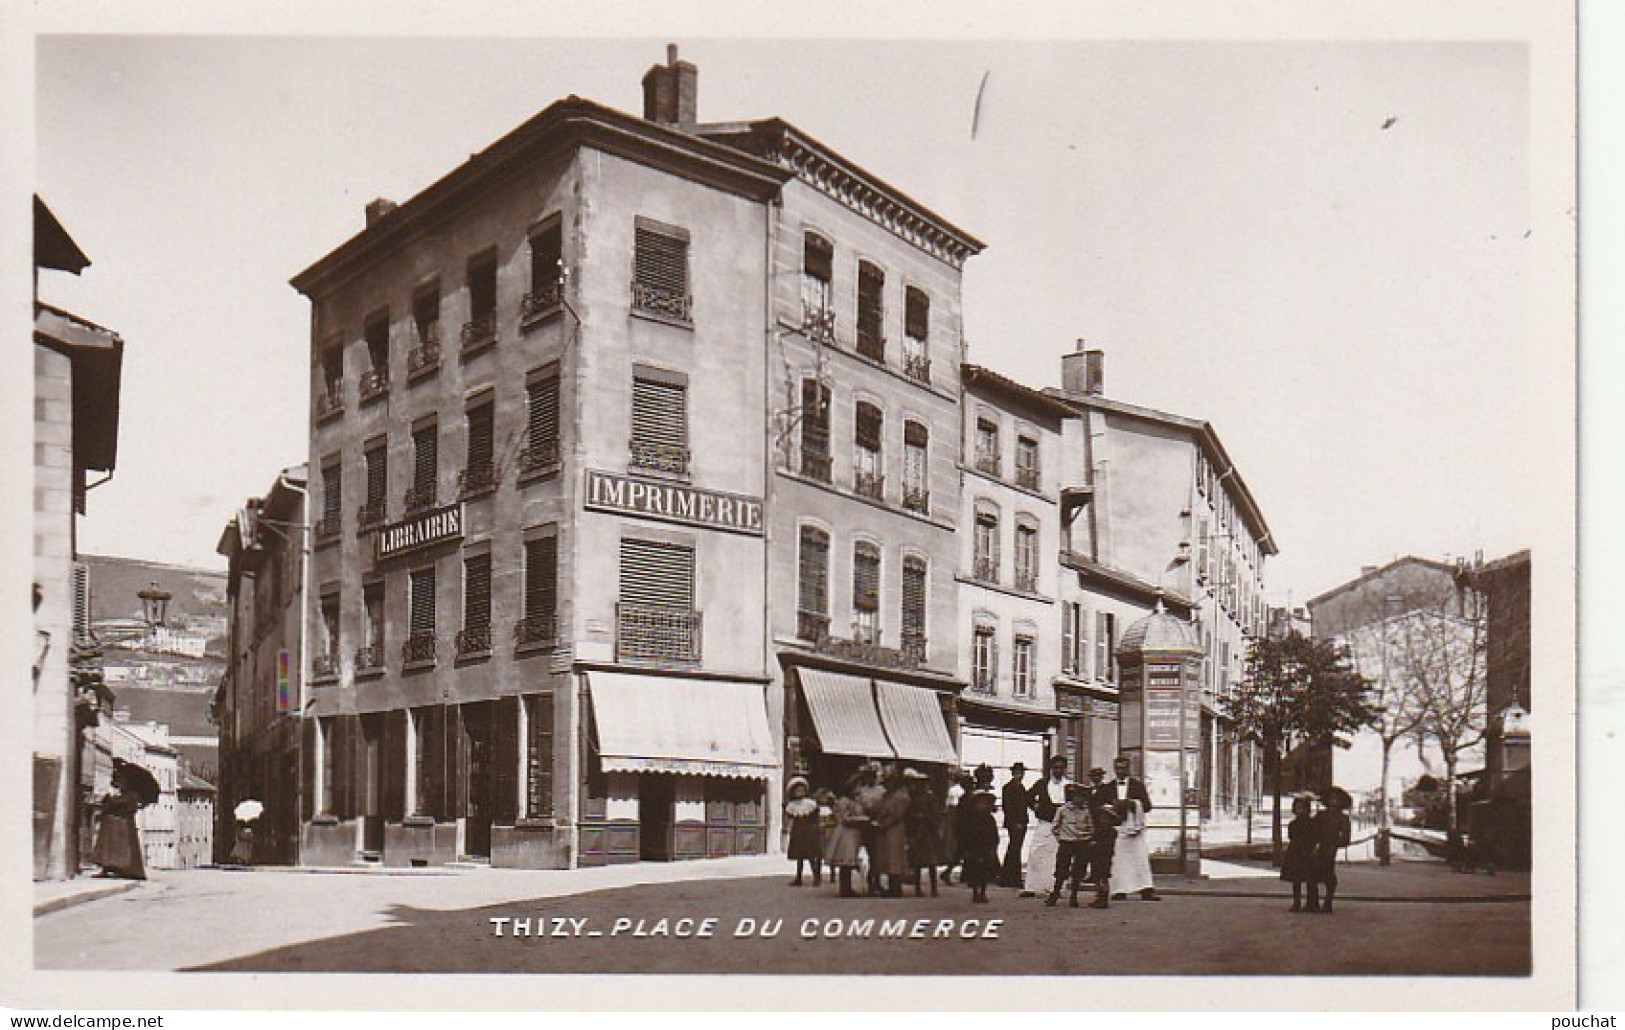 IN 7 - (69) THIZY  -  PLACE DU COMMERCE - IMPRIMERIE PERRIN- CAFE DU COMMERCE , PERSONNEL - 2 SCANS  - Thizy